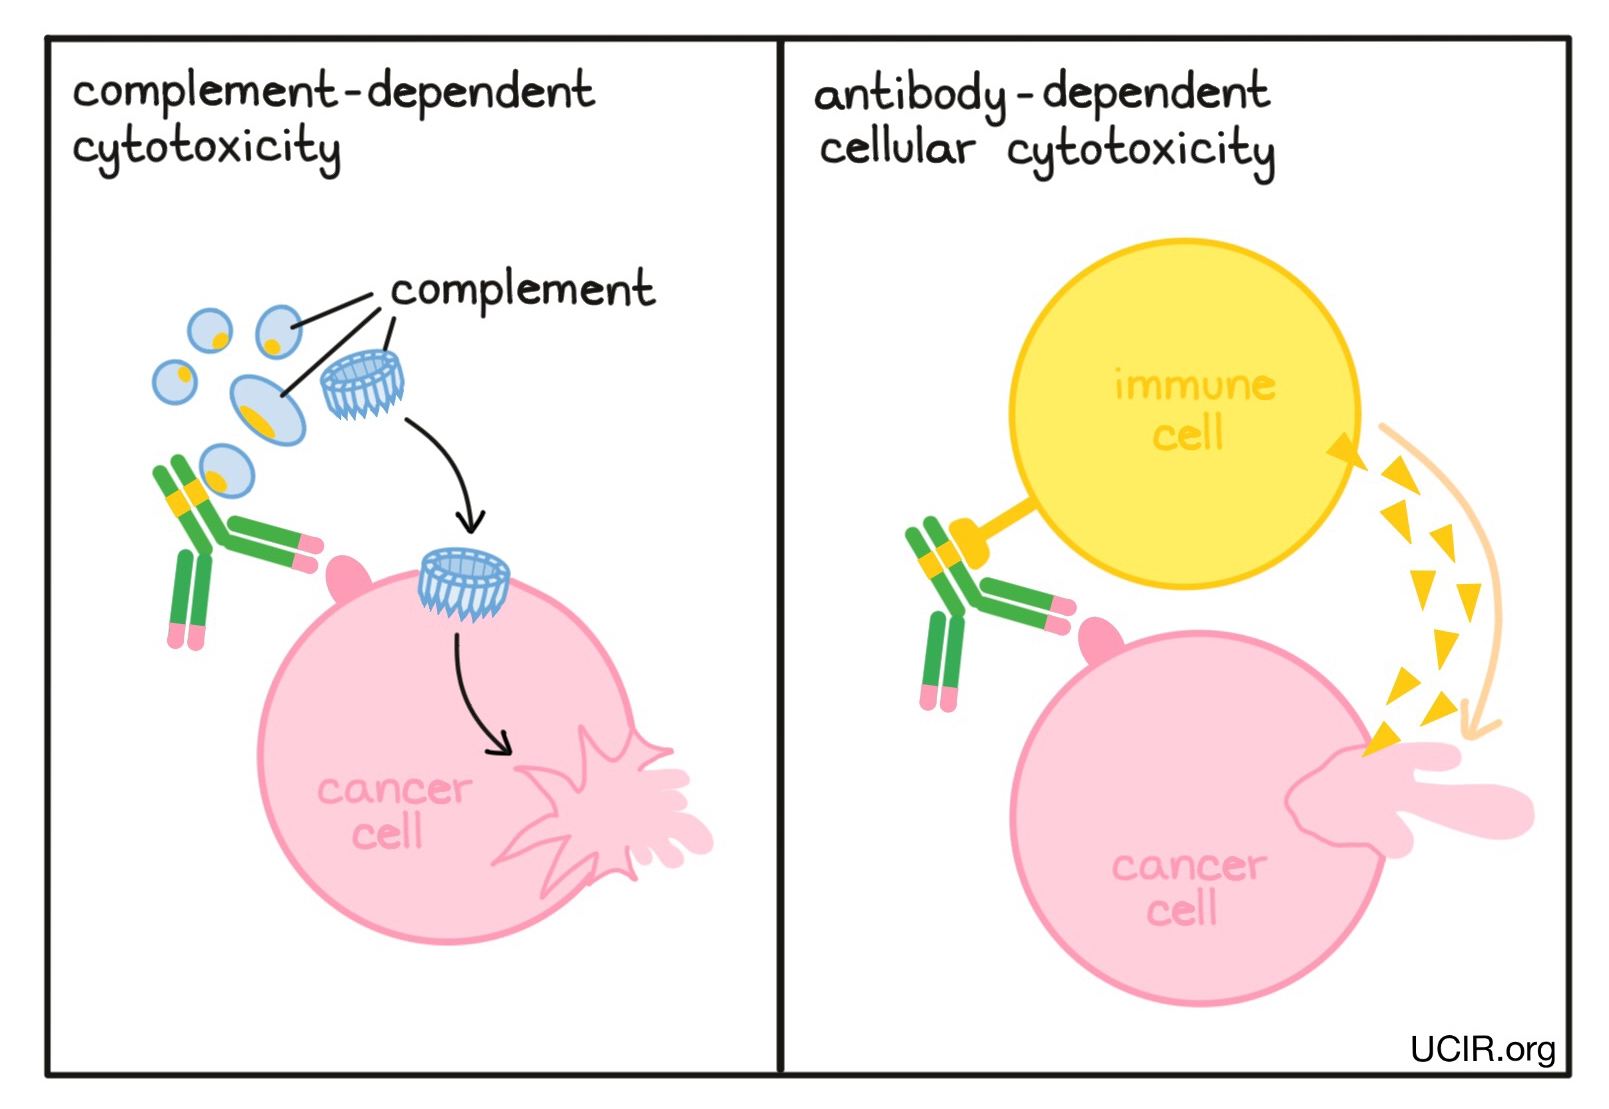 Illustration showing complement-dependent cytotoxicity and antibody-dependent cell-mediated cytotoxicity